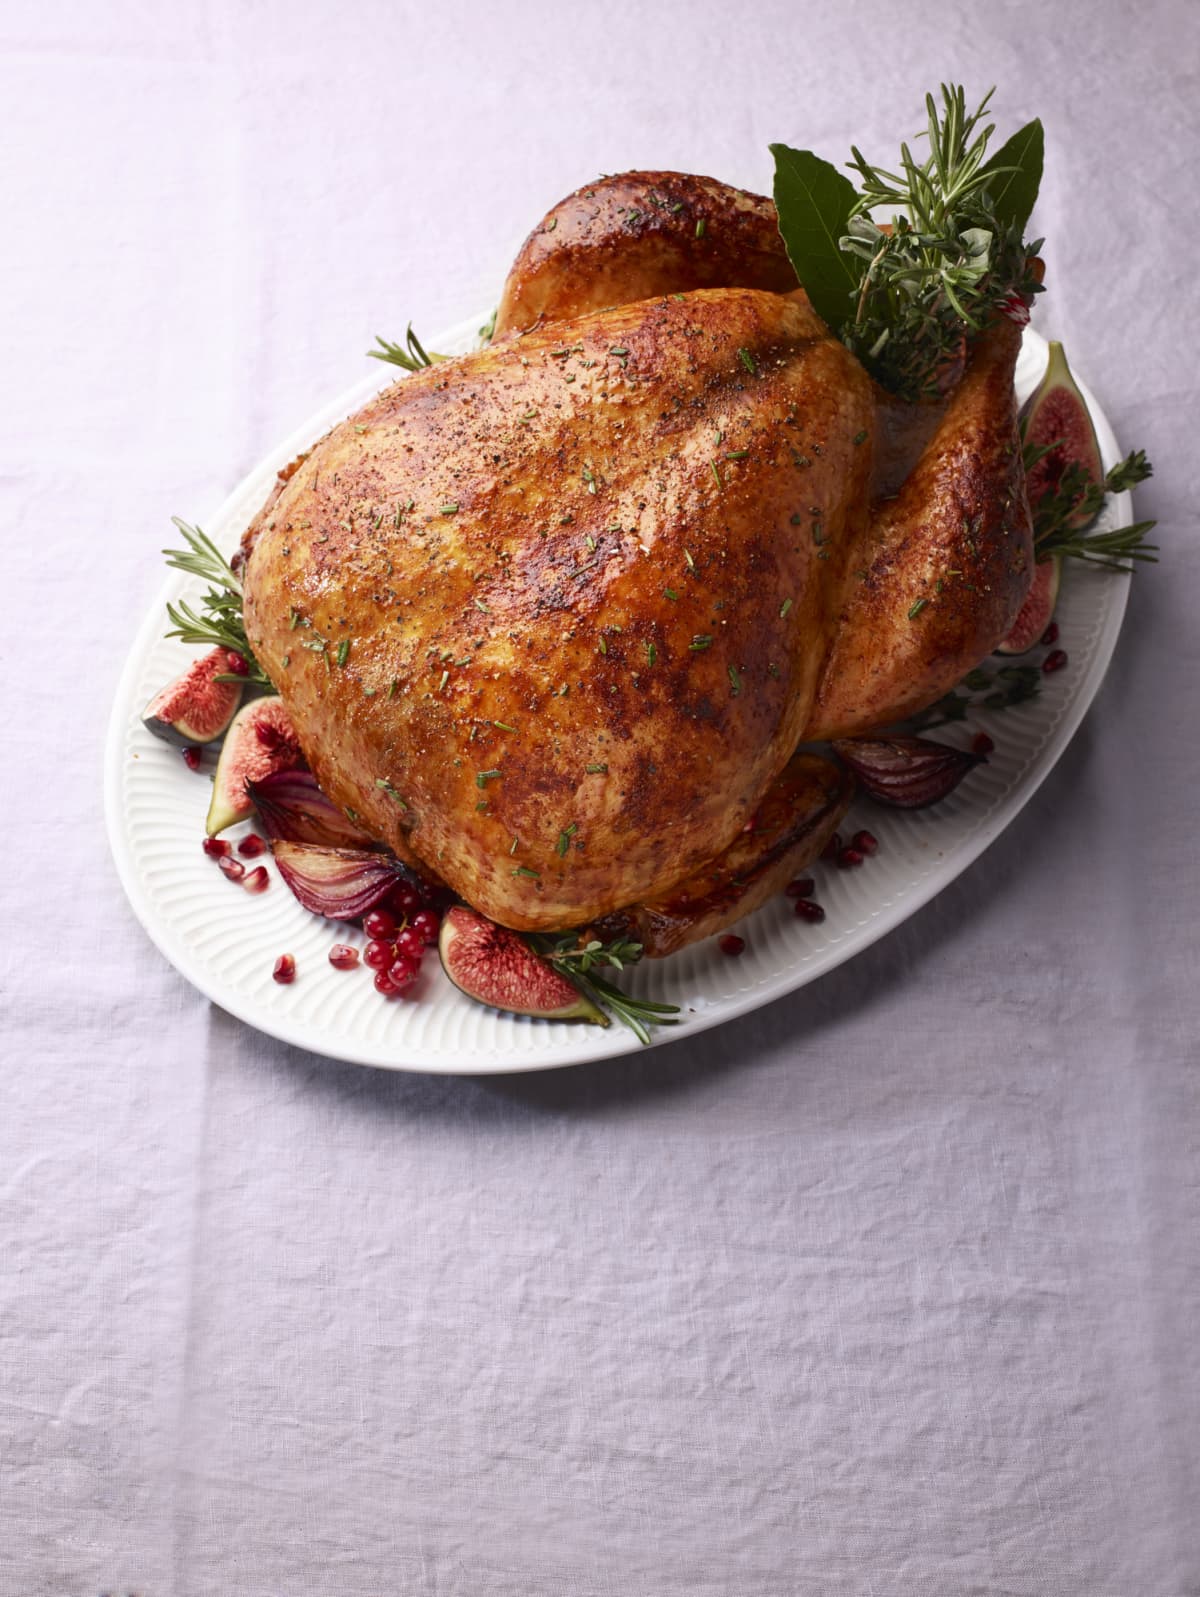 Roasted turkey with rosemary, red onions, figs and red berries